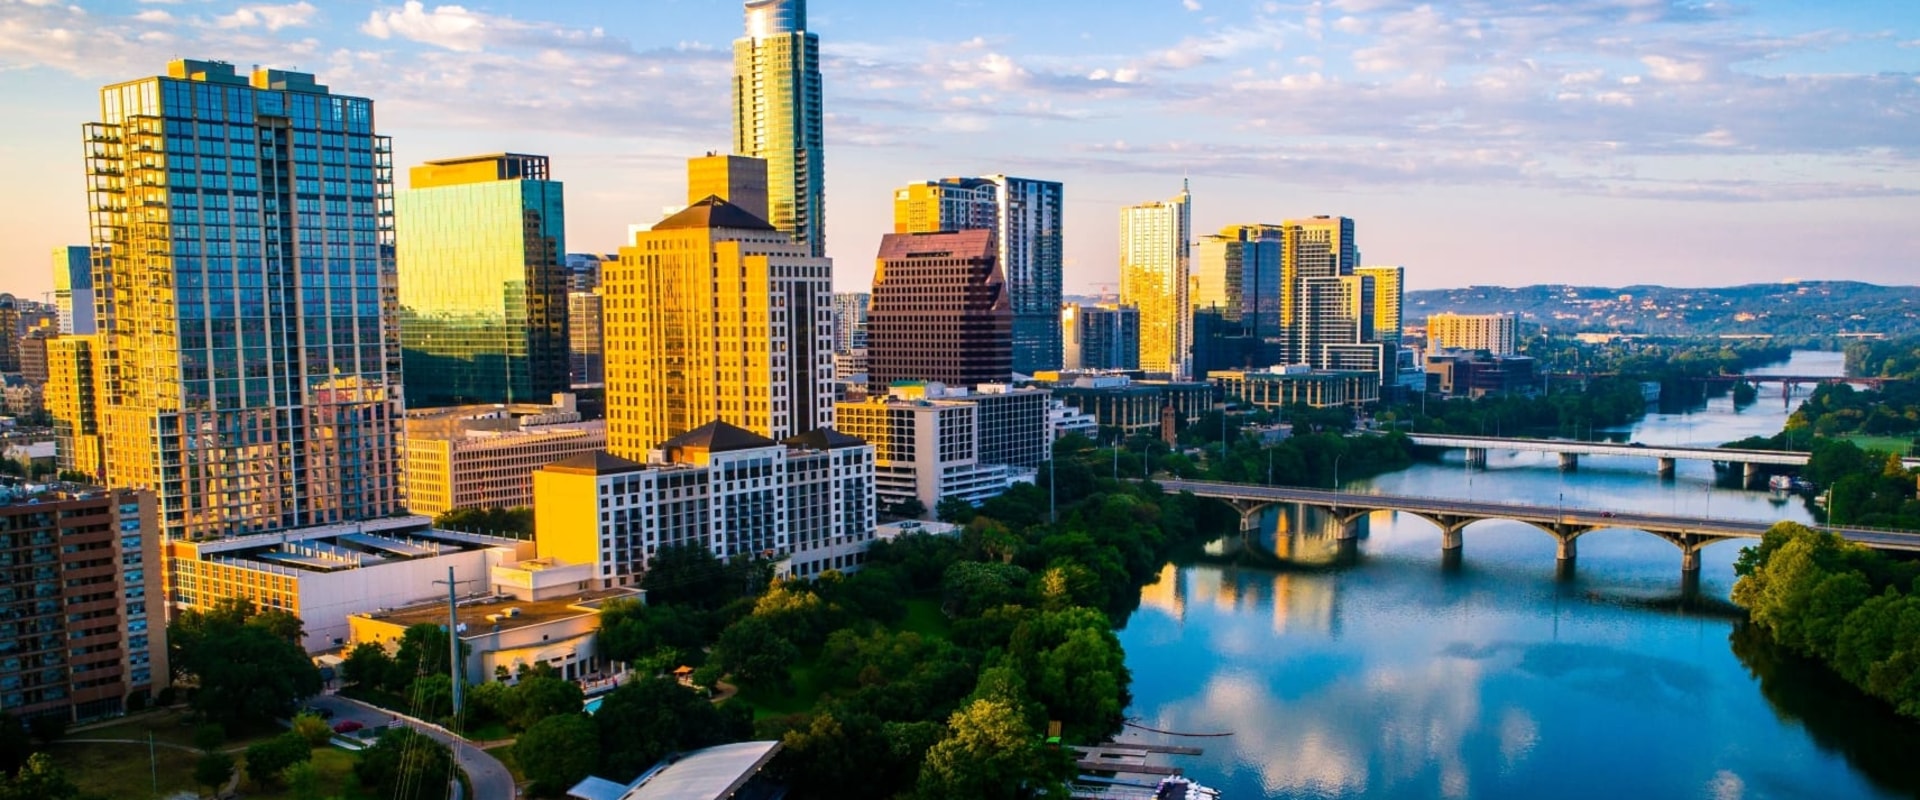 Should i move to austin from houston?